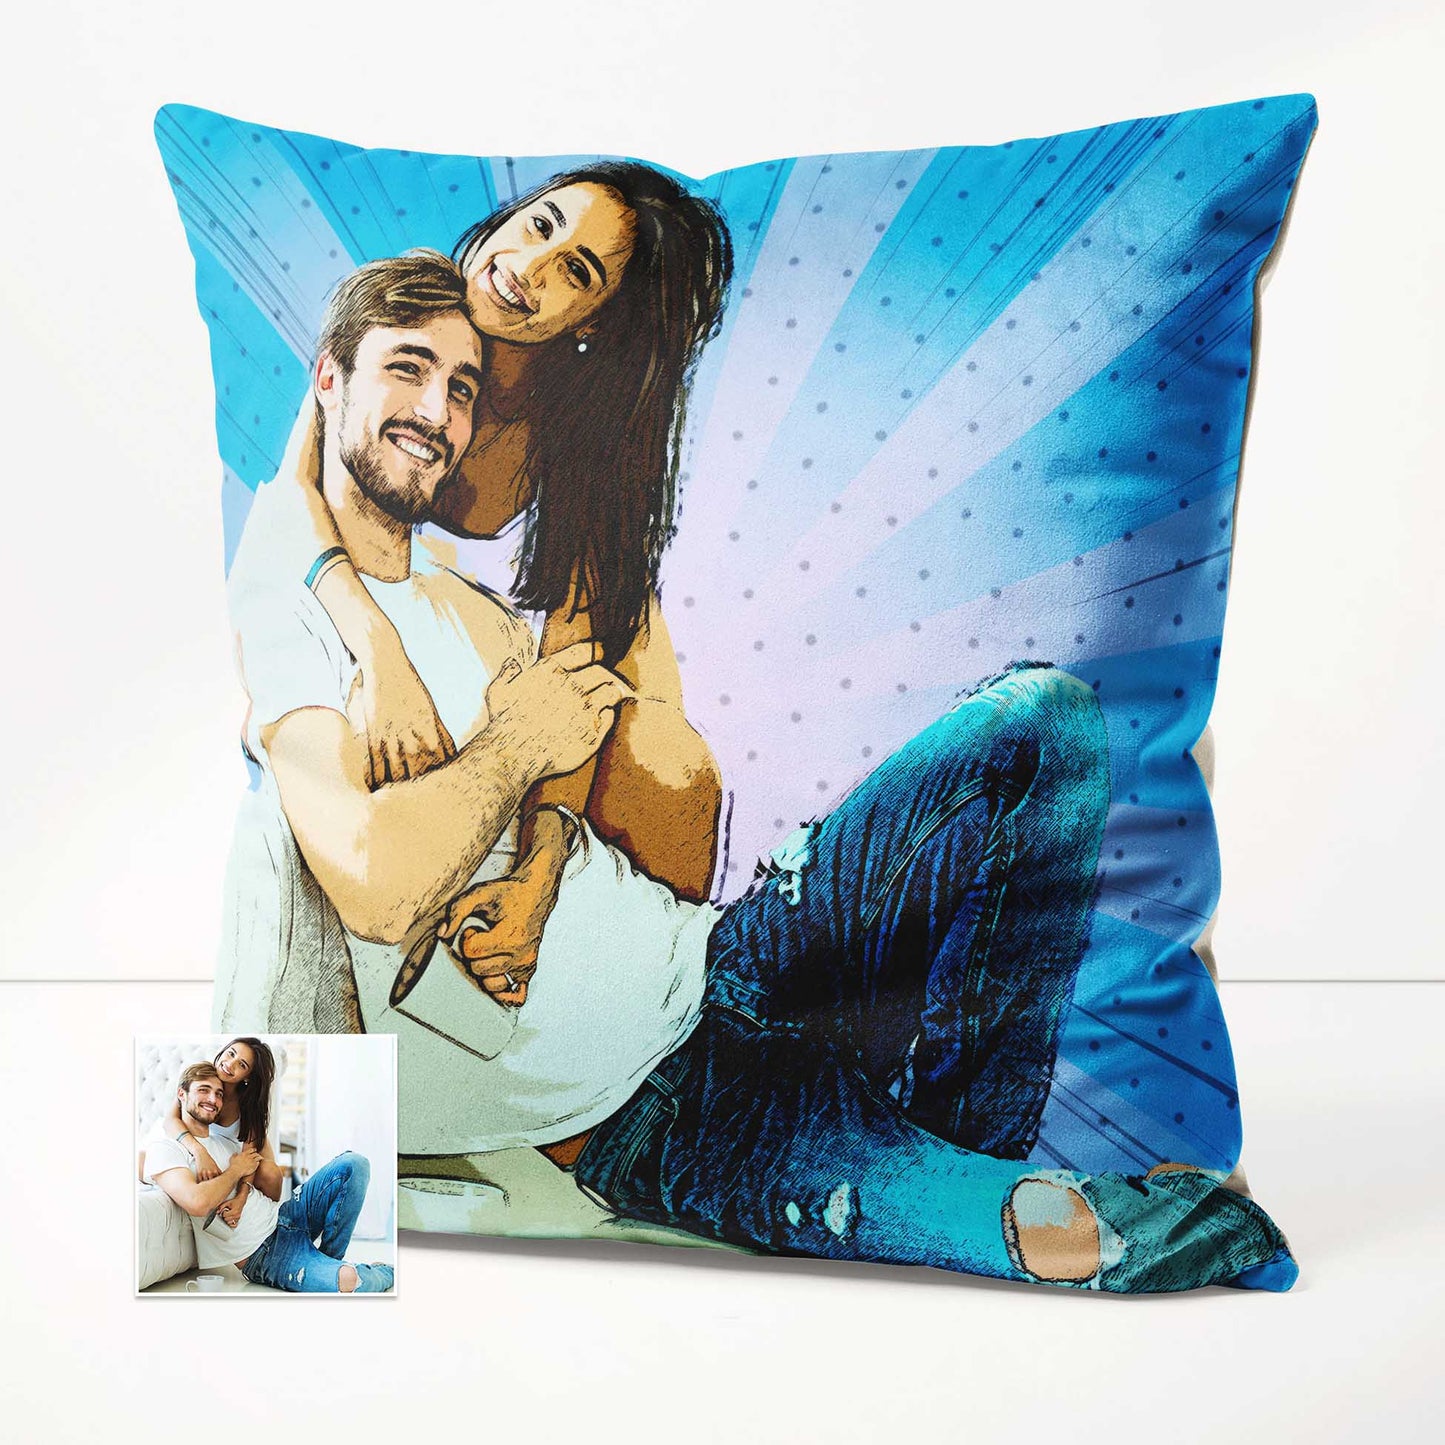 Transform your favorite photo into a Personalised Cartoon Comics Cushion that exudes cozy comfort. Its vibrant and vivid colors add a pop of energy to any room, making it an eye-catching piece of interior design